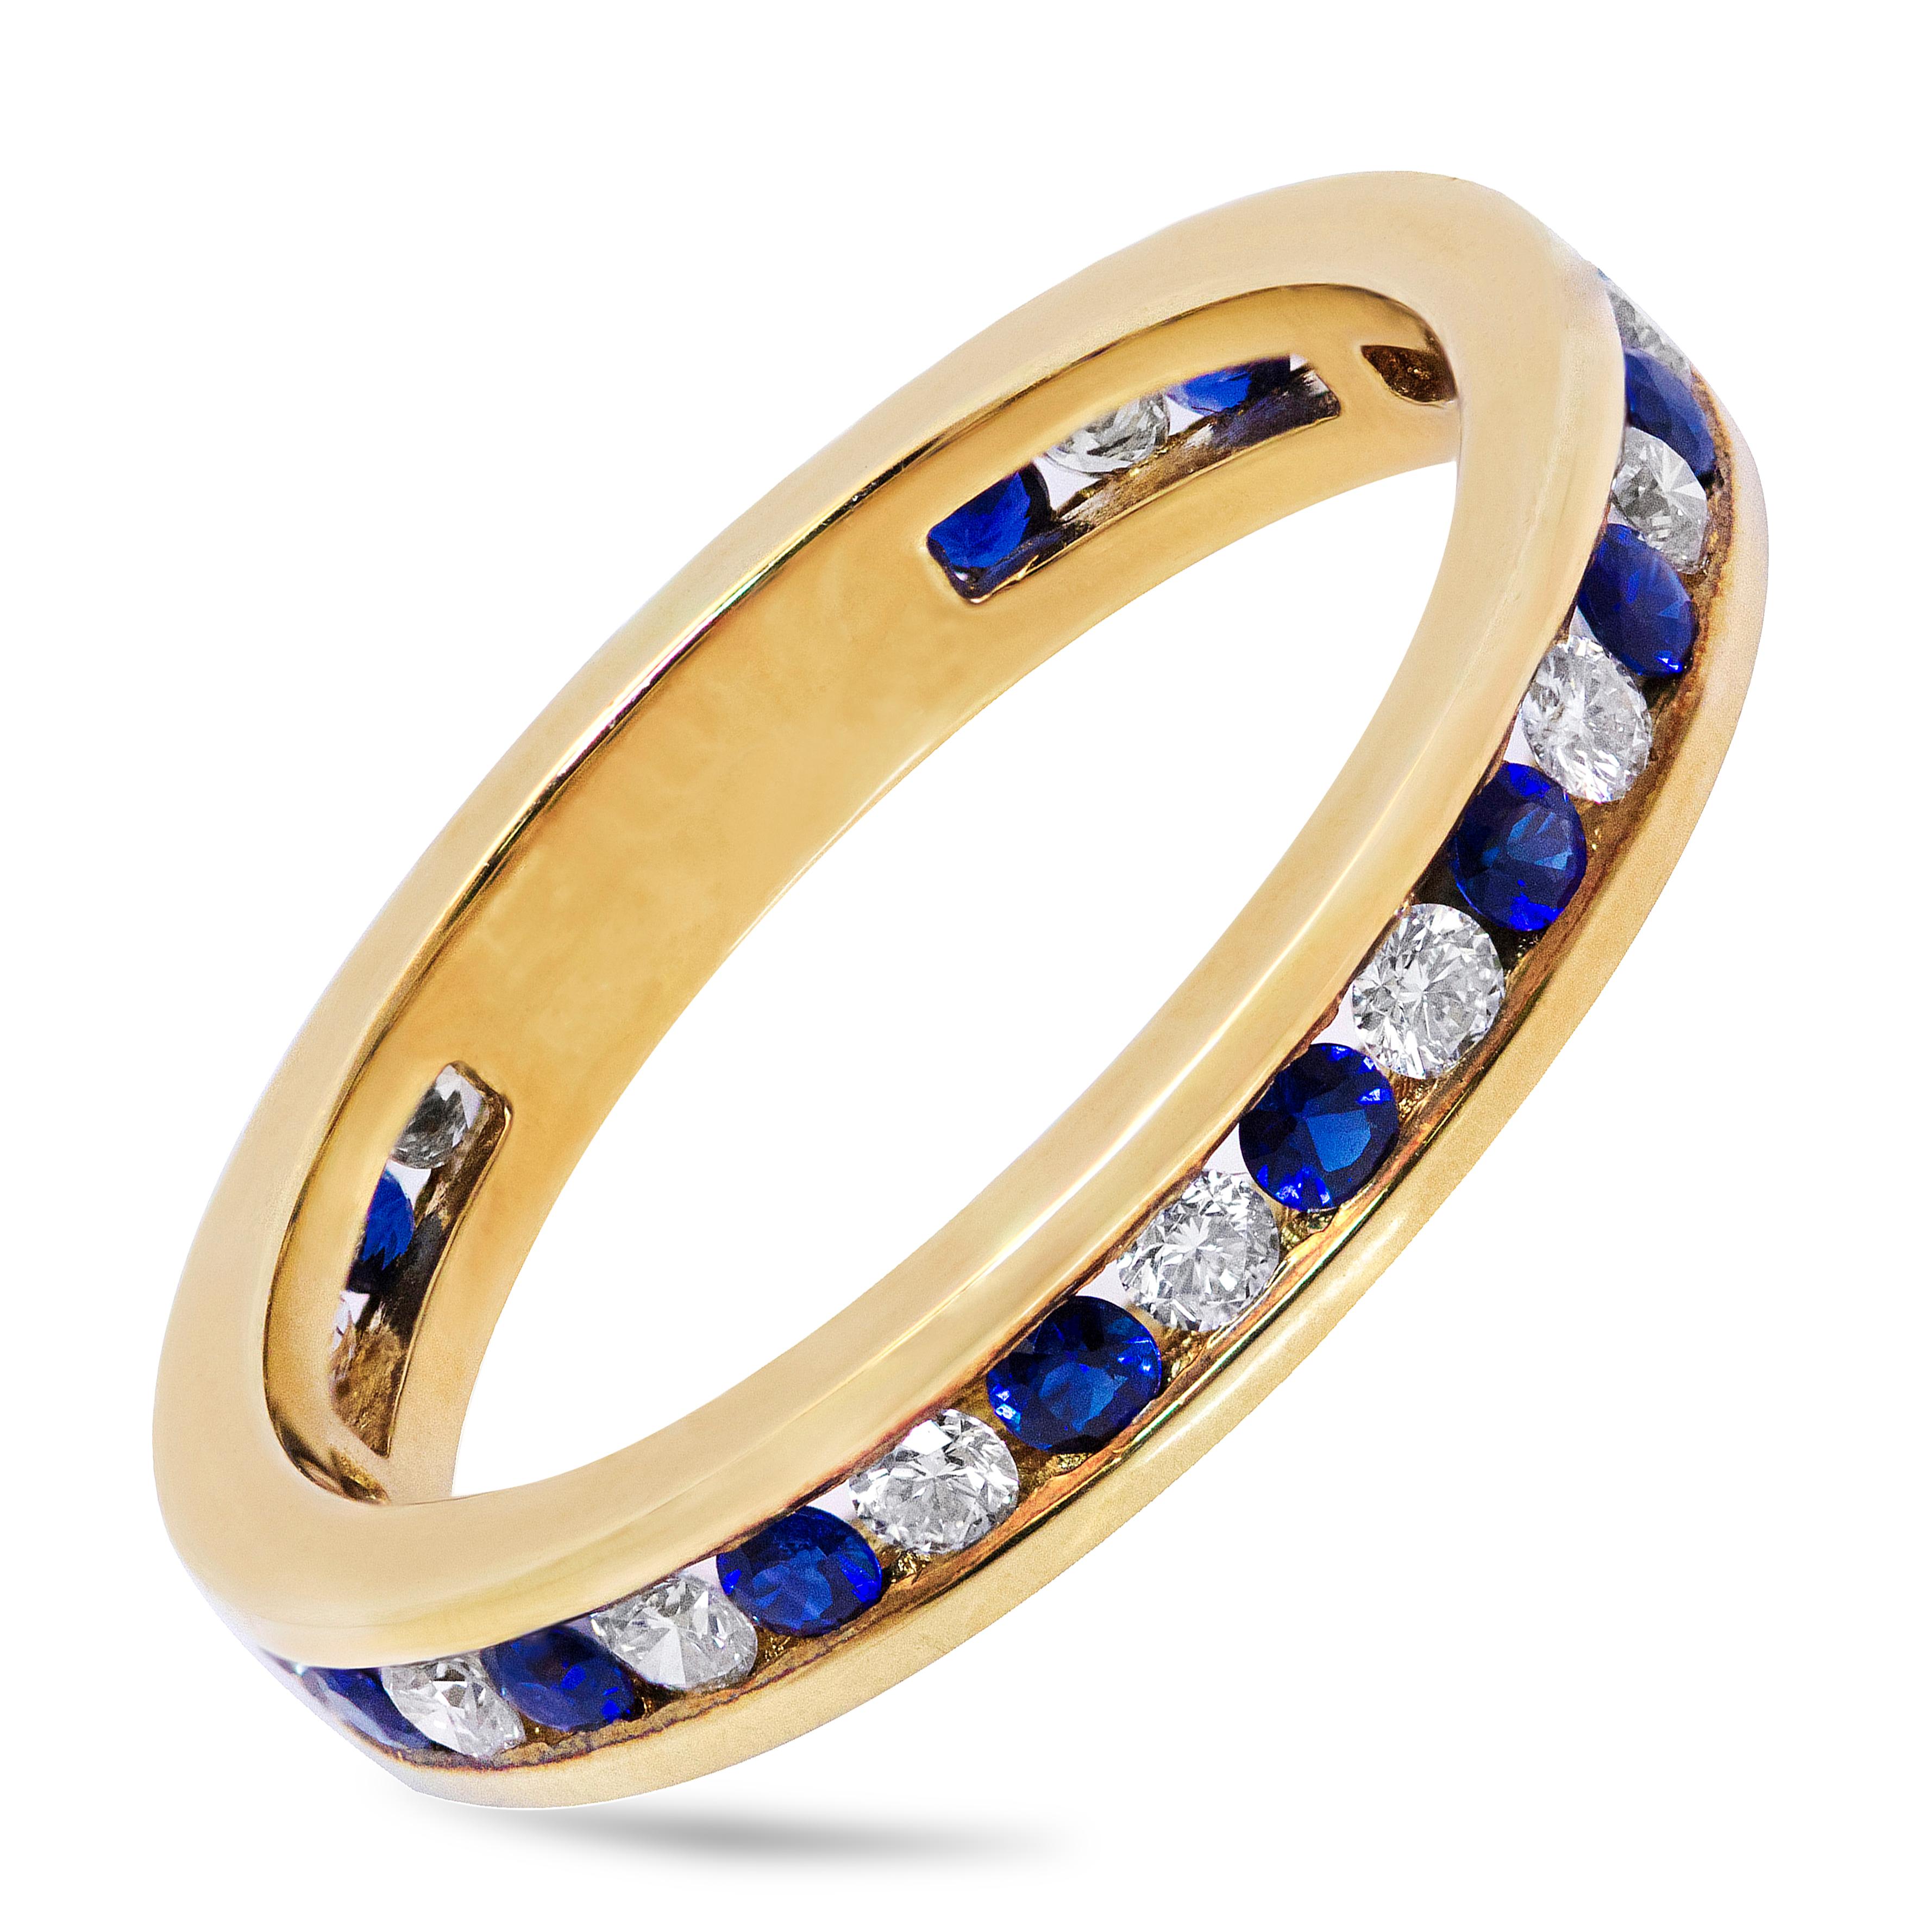 This stylish eternity wedding band is set with natural blue sapphires weighing 0.50 carats total, alternating with brilliant round diamonds weighing 0.44 carats total. Set in a channel set and Finely made in 18K Yellow Gold, Size 7.25 US resizable